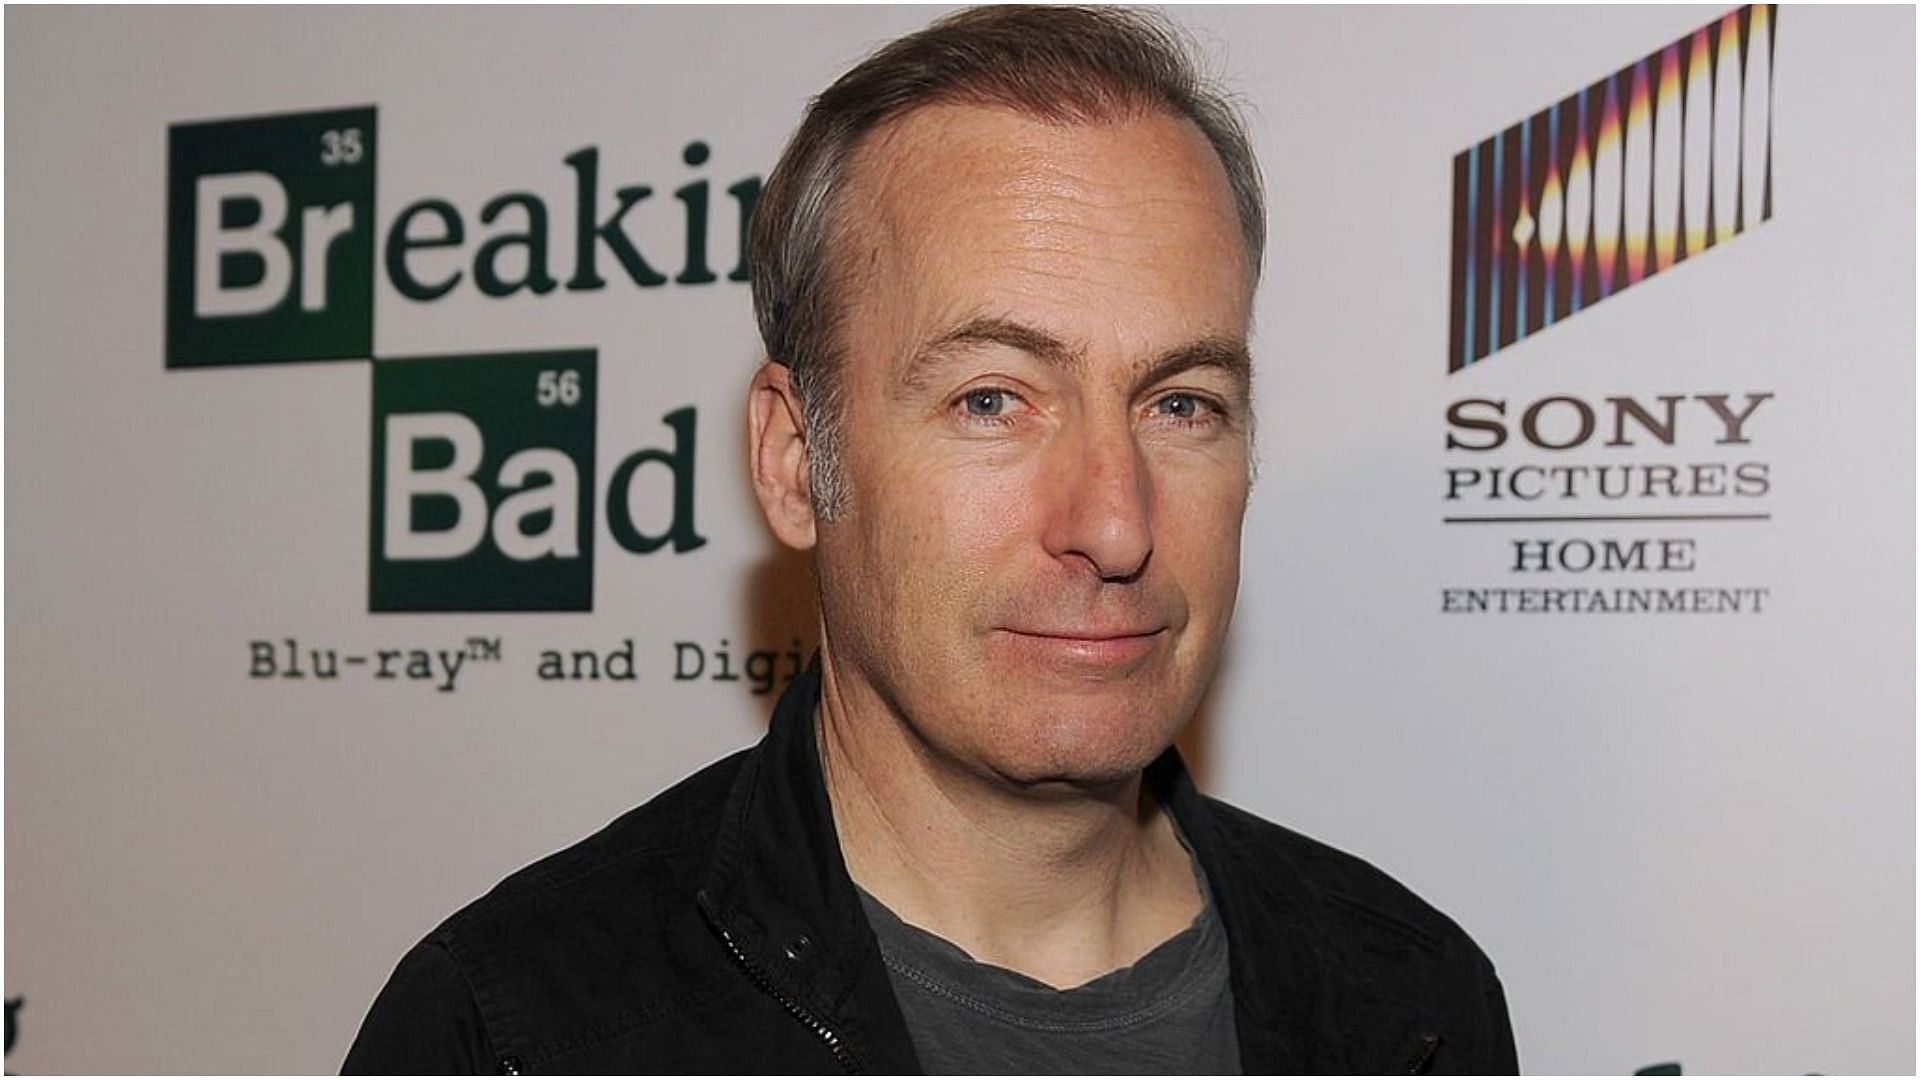 Bob Odenkirk revealed that he was bankrupt before being cast in Breaking Bad (Image via Kevin Winter/Getty Images)